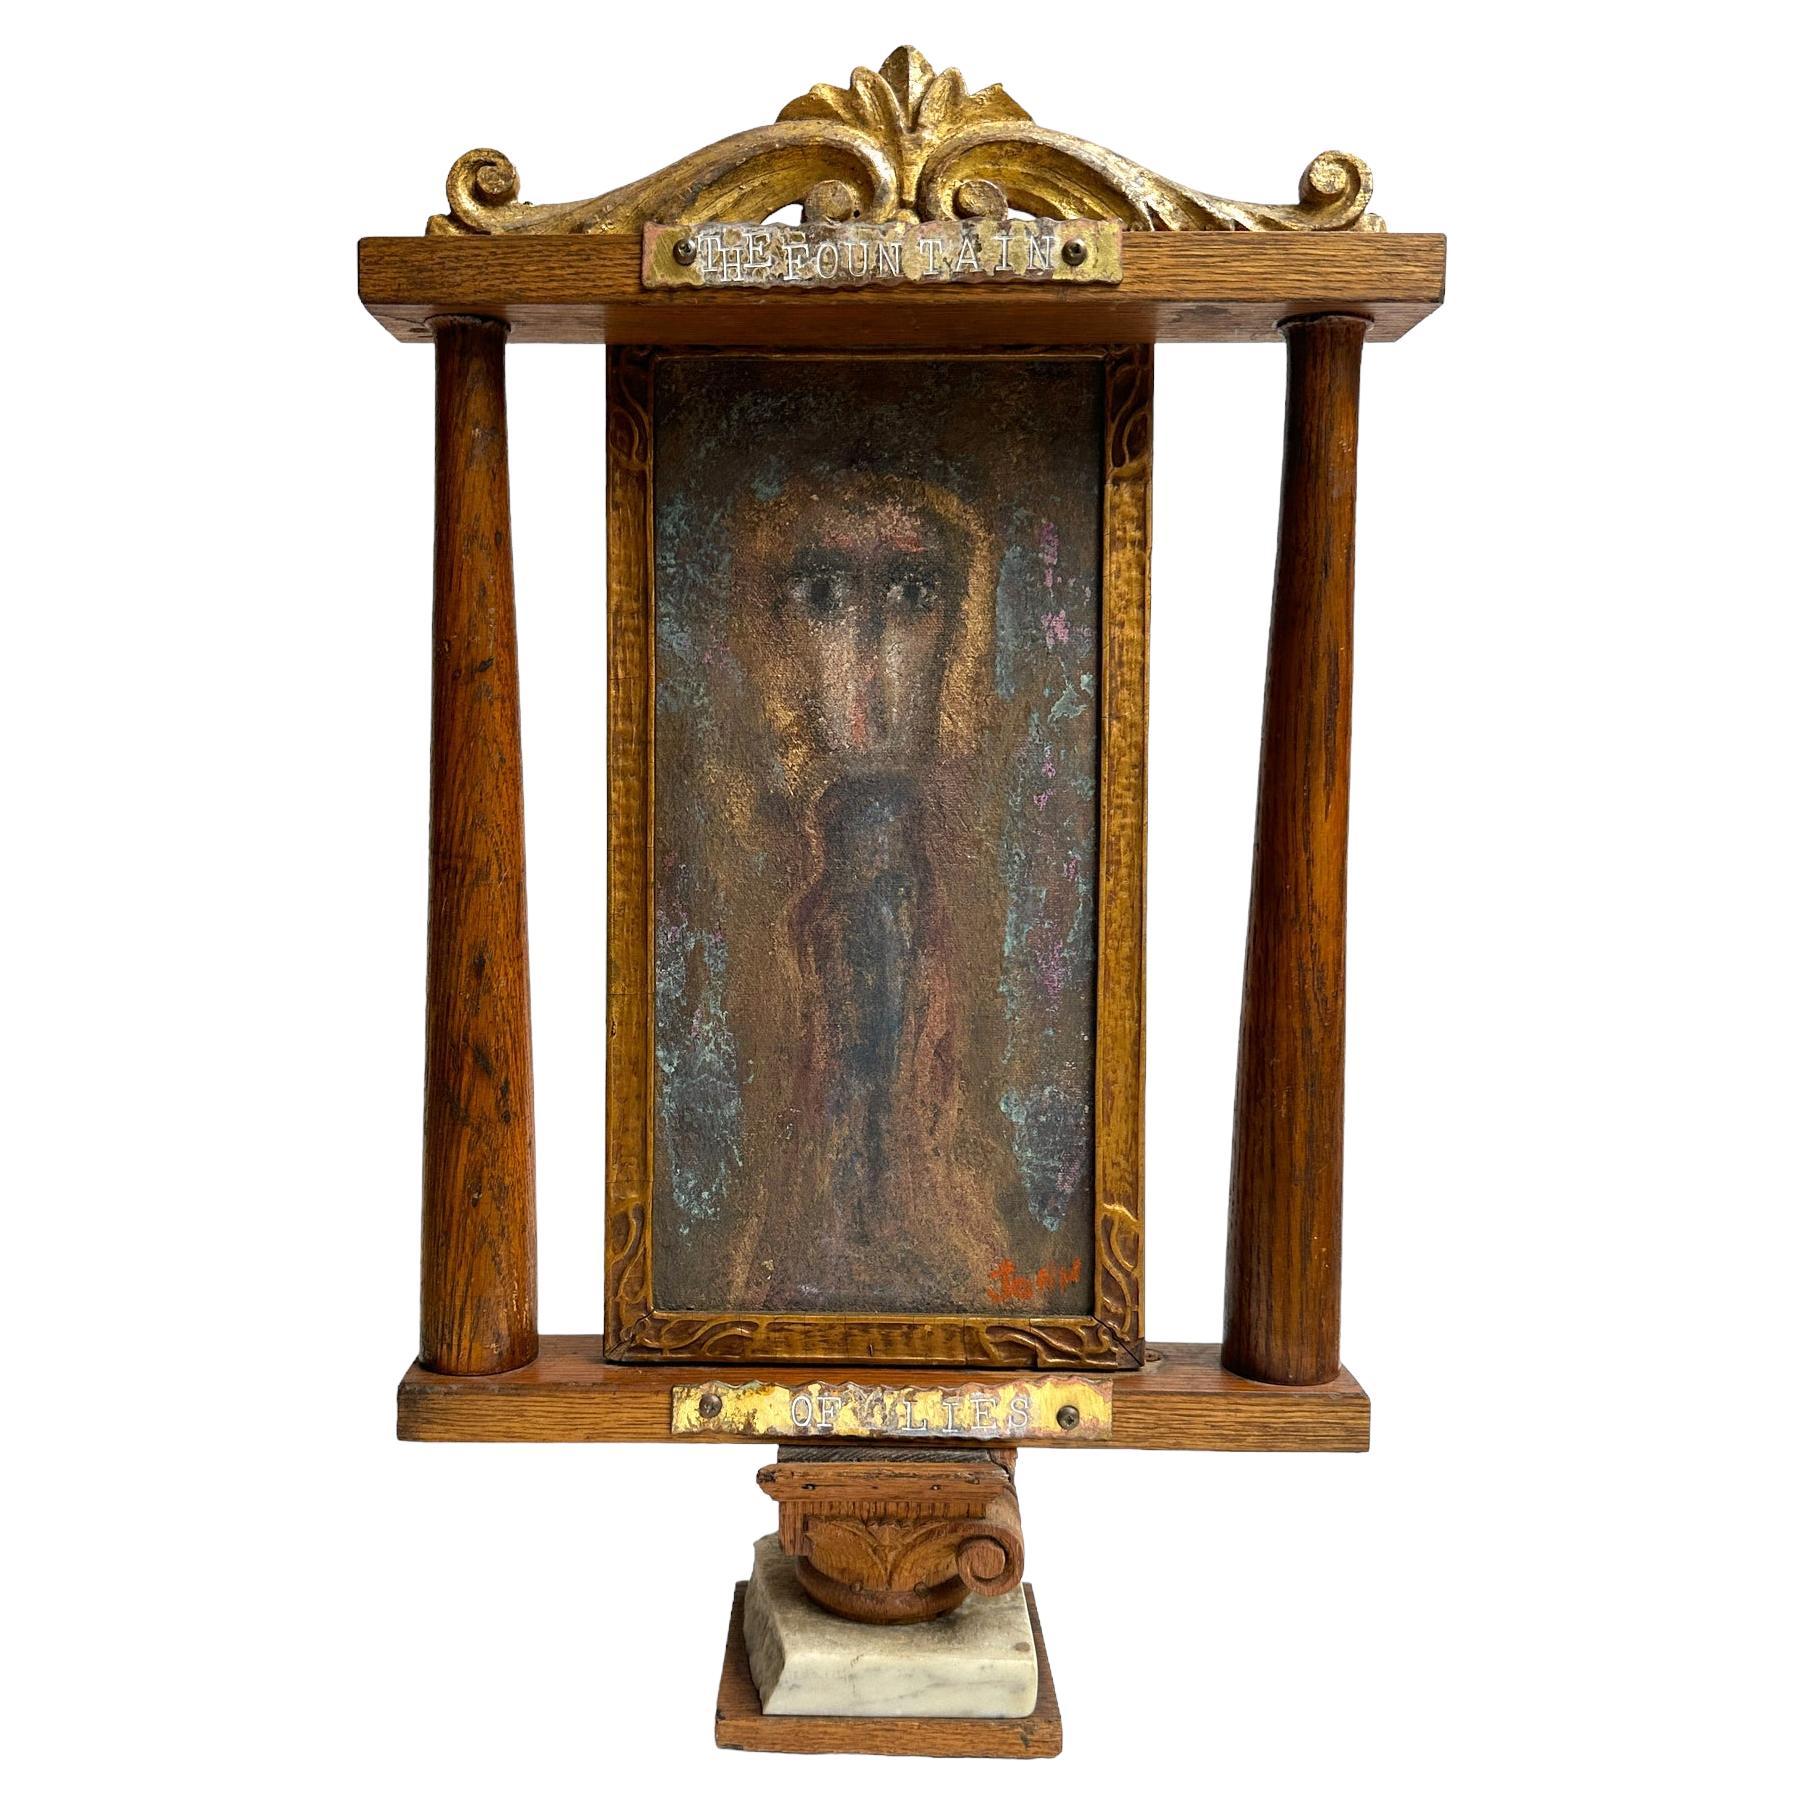 Self-taught artist John Seubert, AKA John Dolly, uses objects he uncovers as he rehabs older homes in Chicago. This piece has a figurative painting mounted as a shrine then set upon a corinthian capital and a granite stand. A metal plaque at the top